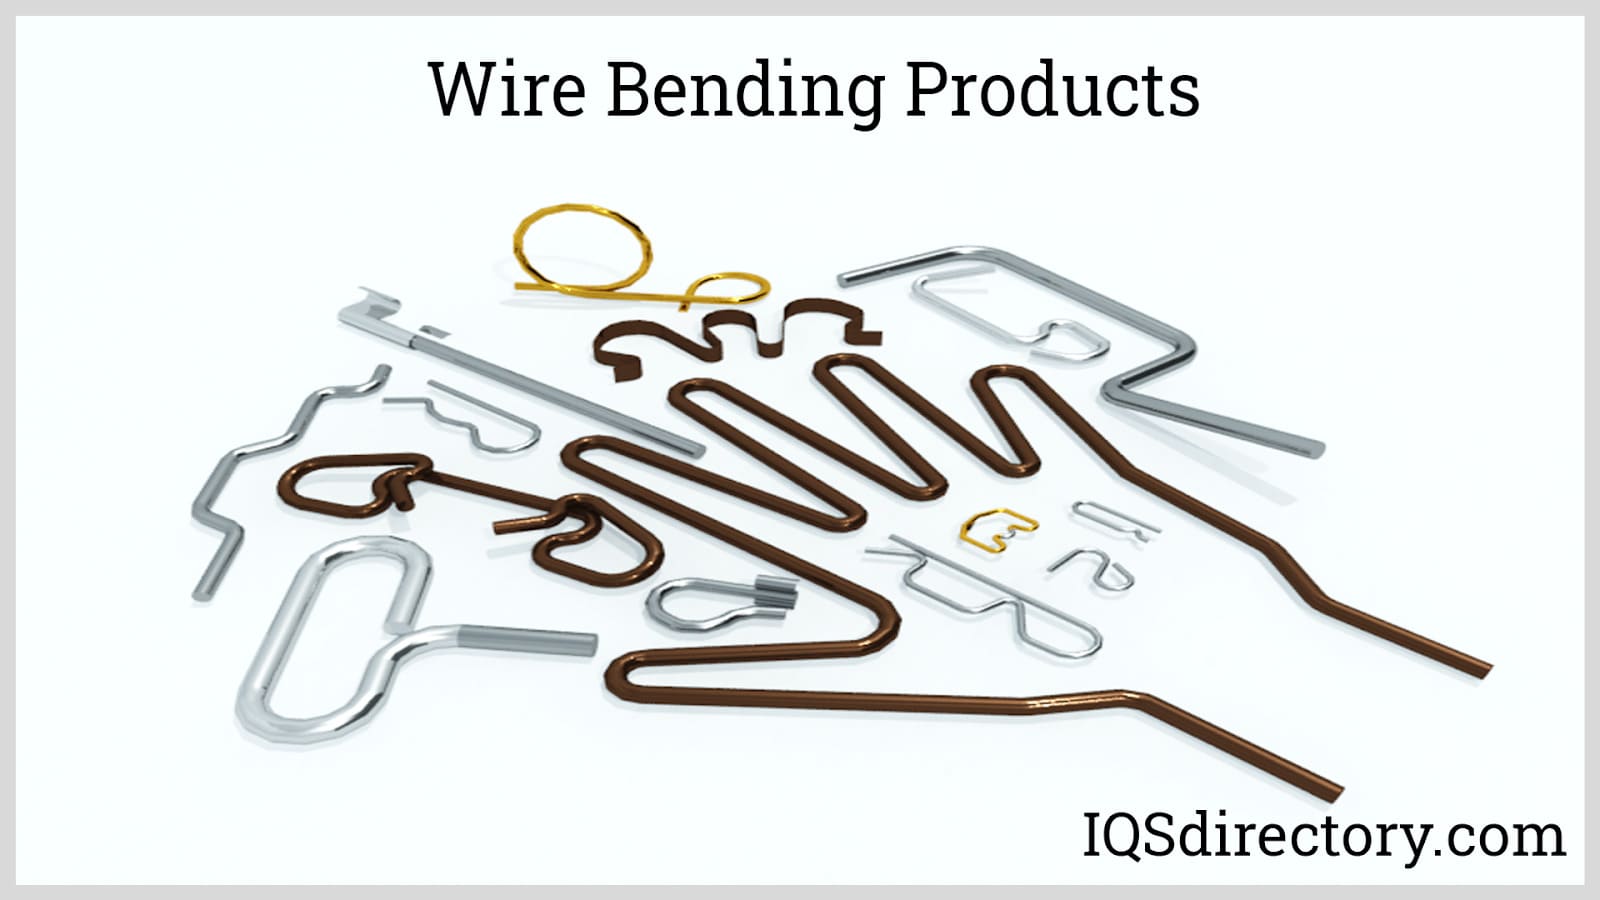 Wire Bending Products